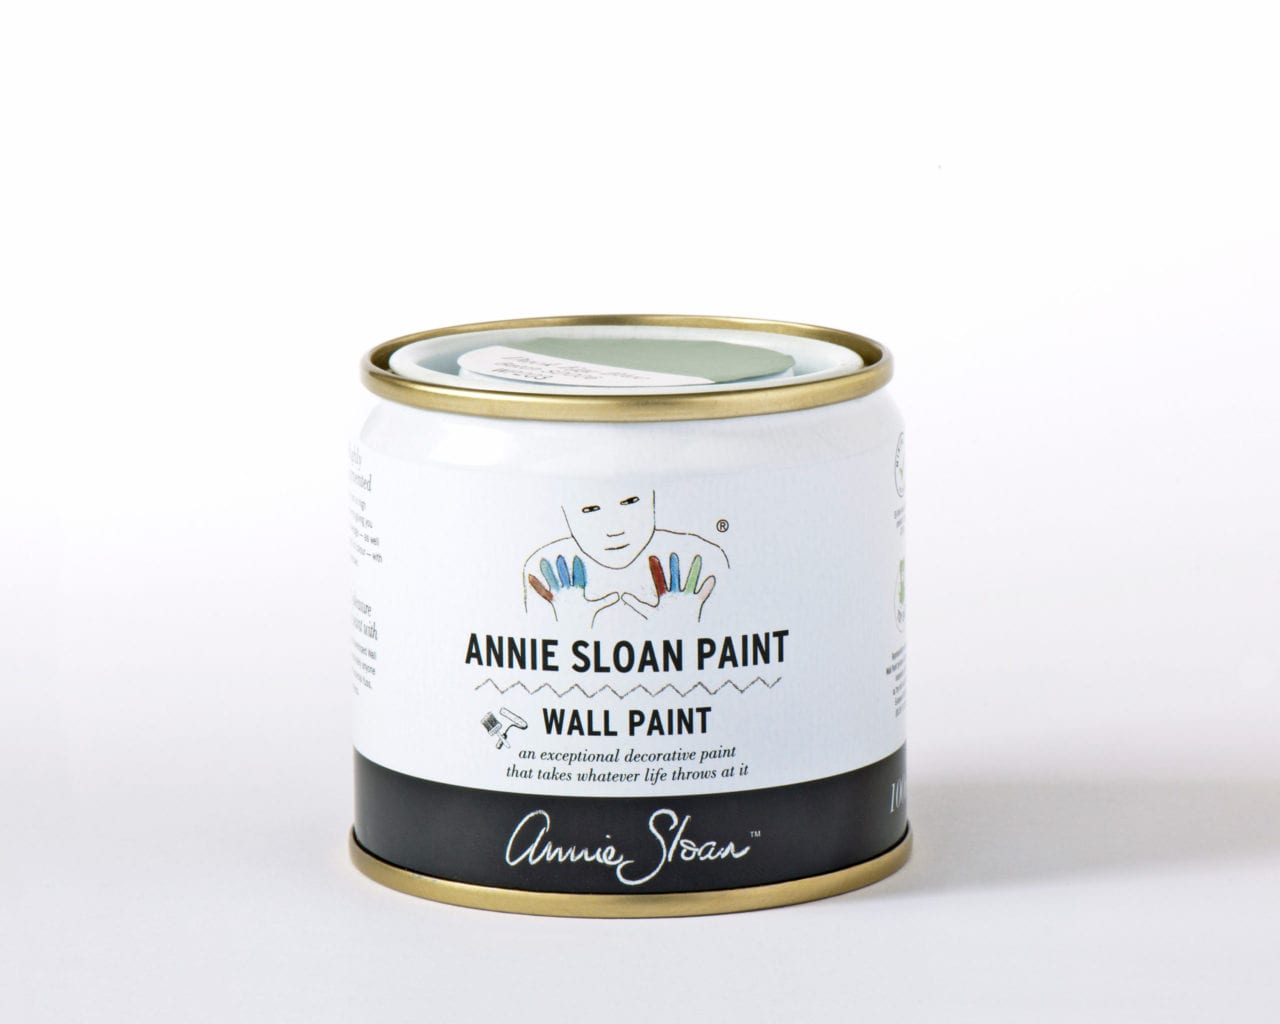 100ml tester tin of Wall Paint by Annie Sloan in Duck Egg Blue, a greenish soft blue